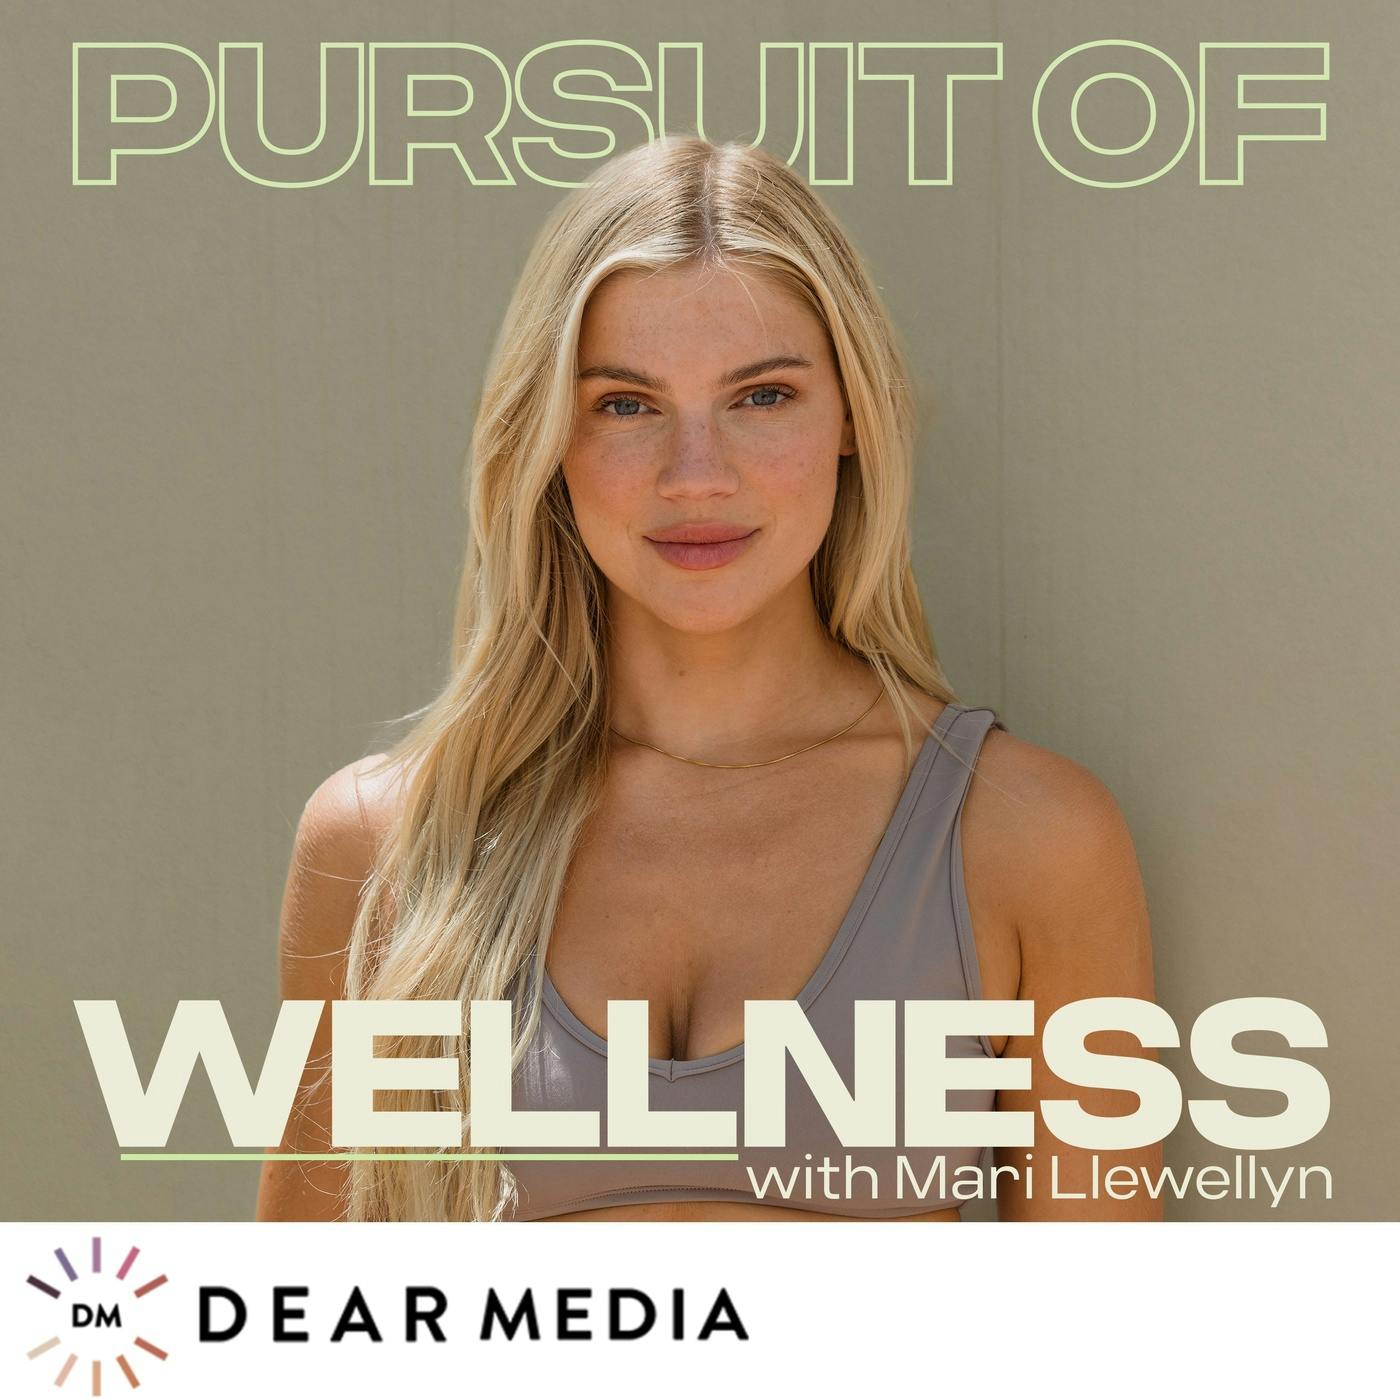 Paige Lindgren on Thyroid Health, Cycle Syncing, Menstrual Phases, Protein at Breakfast, Fight or Flight, Blue Light & Cortisol, BPA’s and Microplastics, Healthy Sleep Habits, and more. by Mari Llewellyn